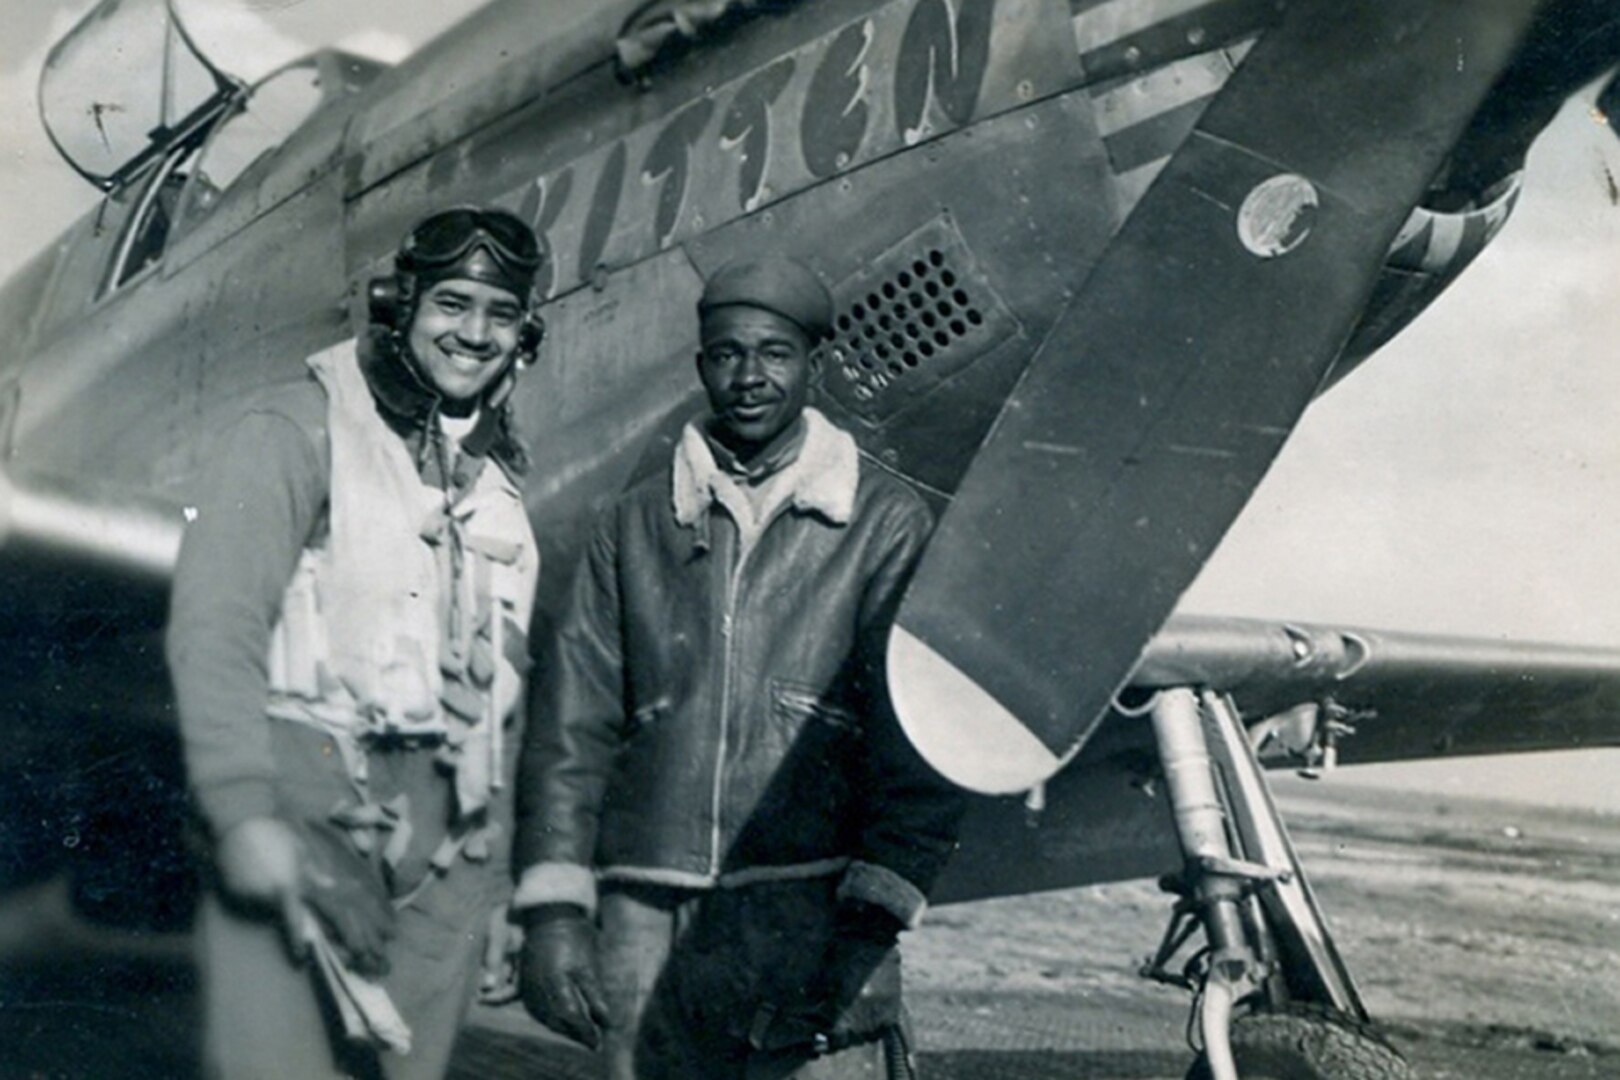 A soldier poses for a photo next to an aircraft with his friend.